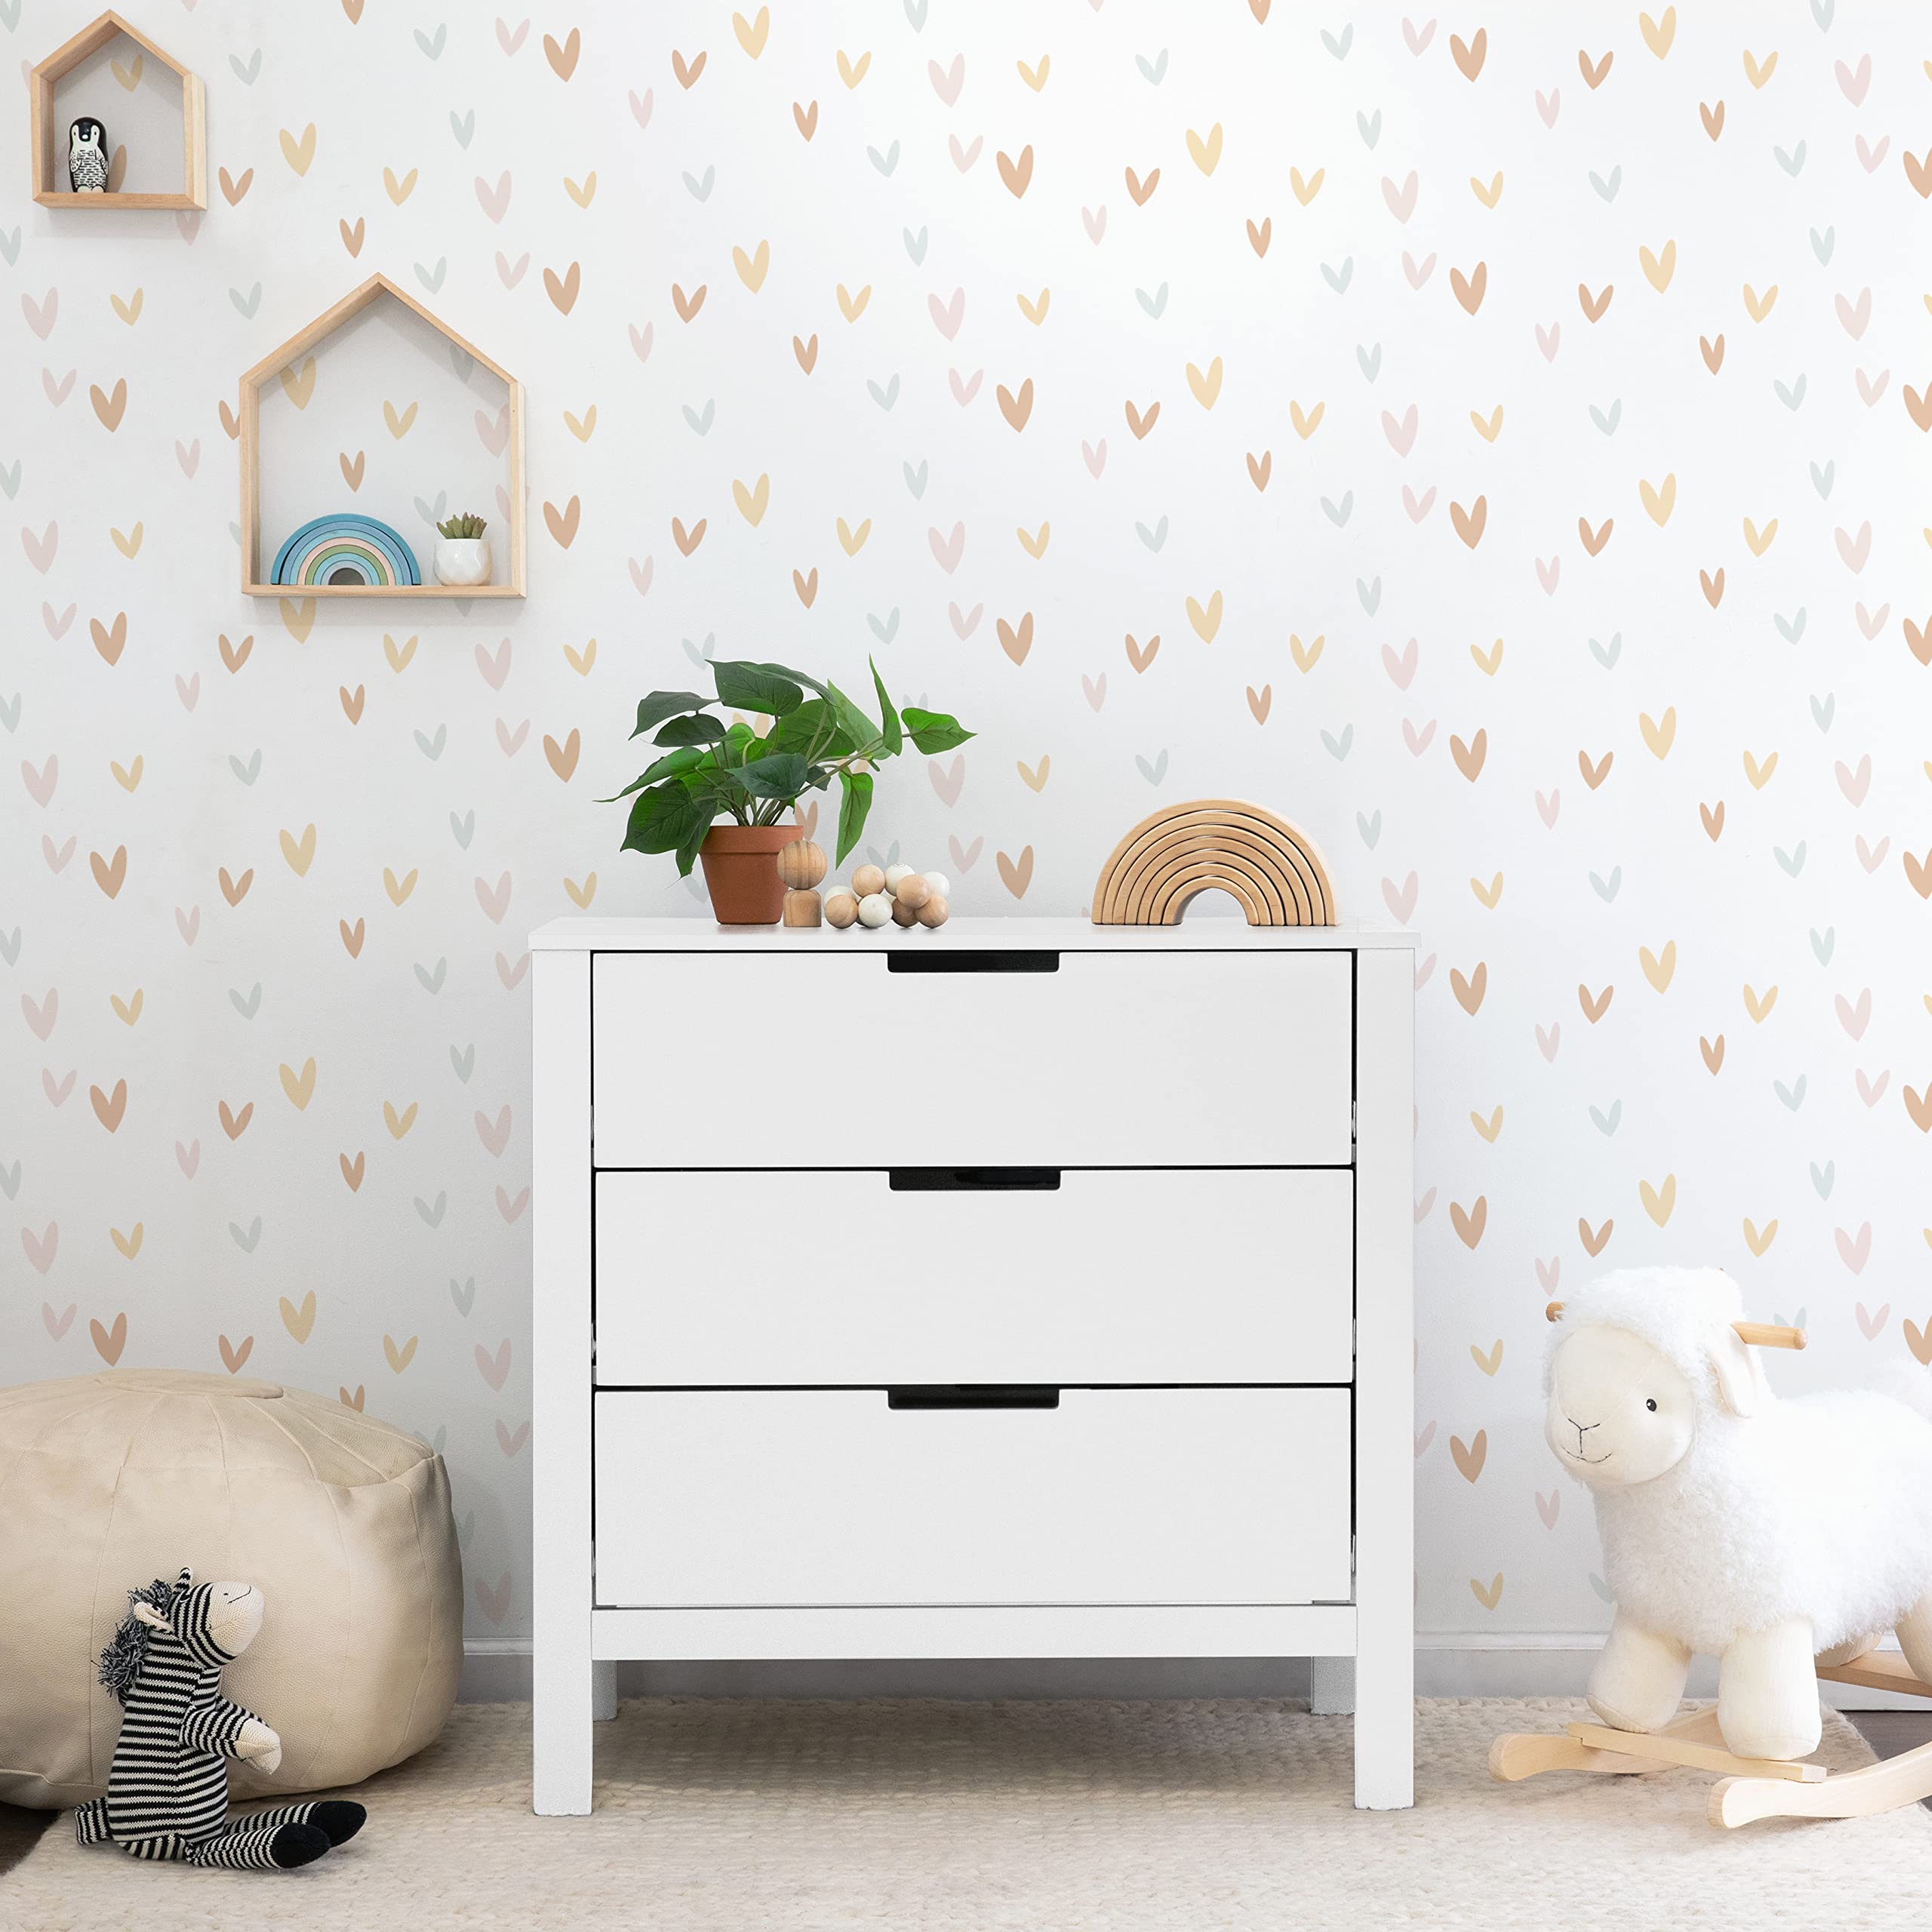 Carter's by DaVinci Colby 3-Drawer Dresser in White